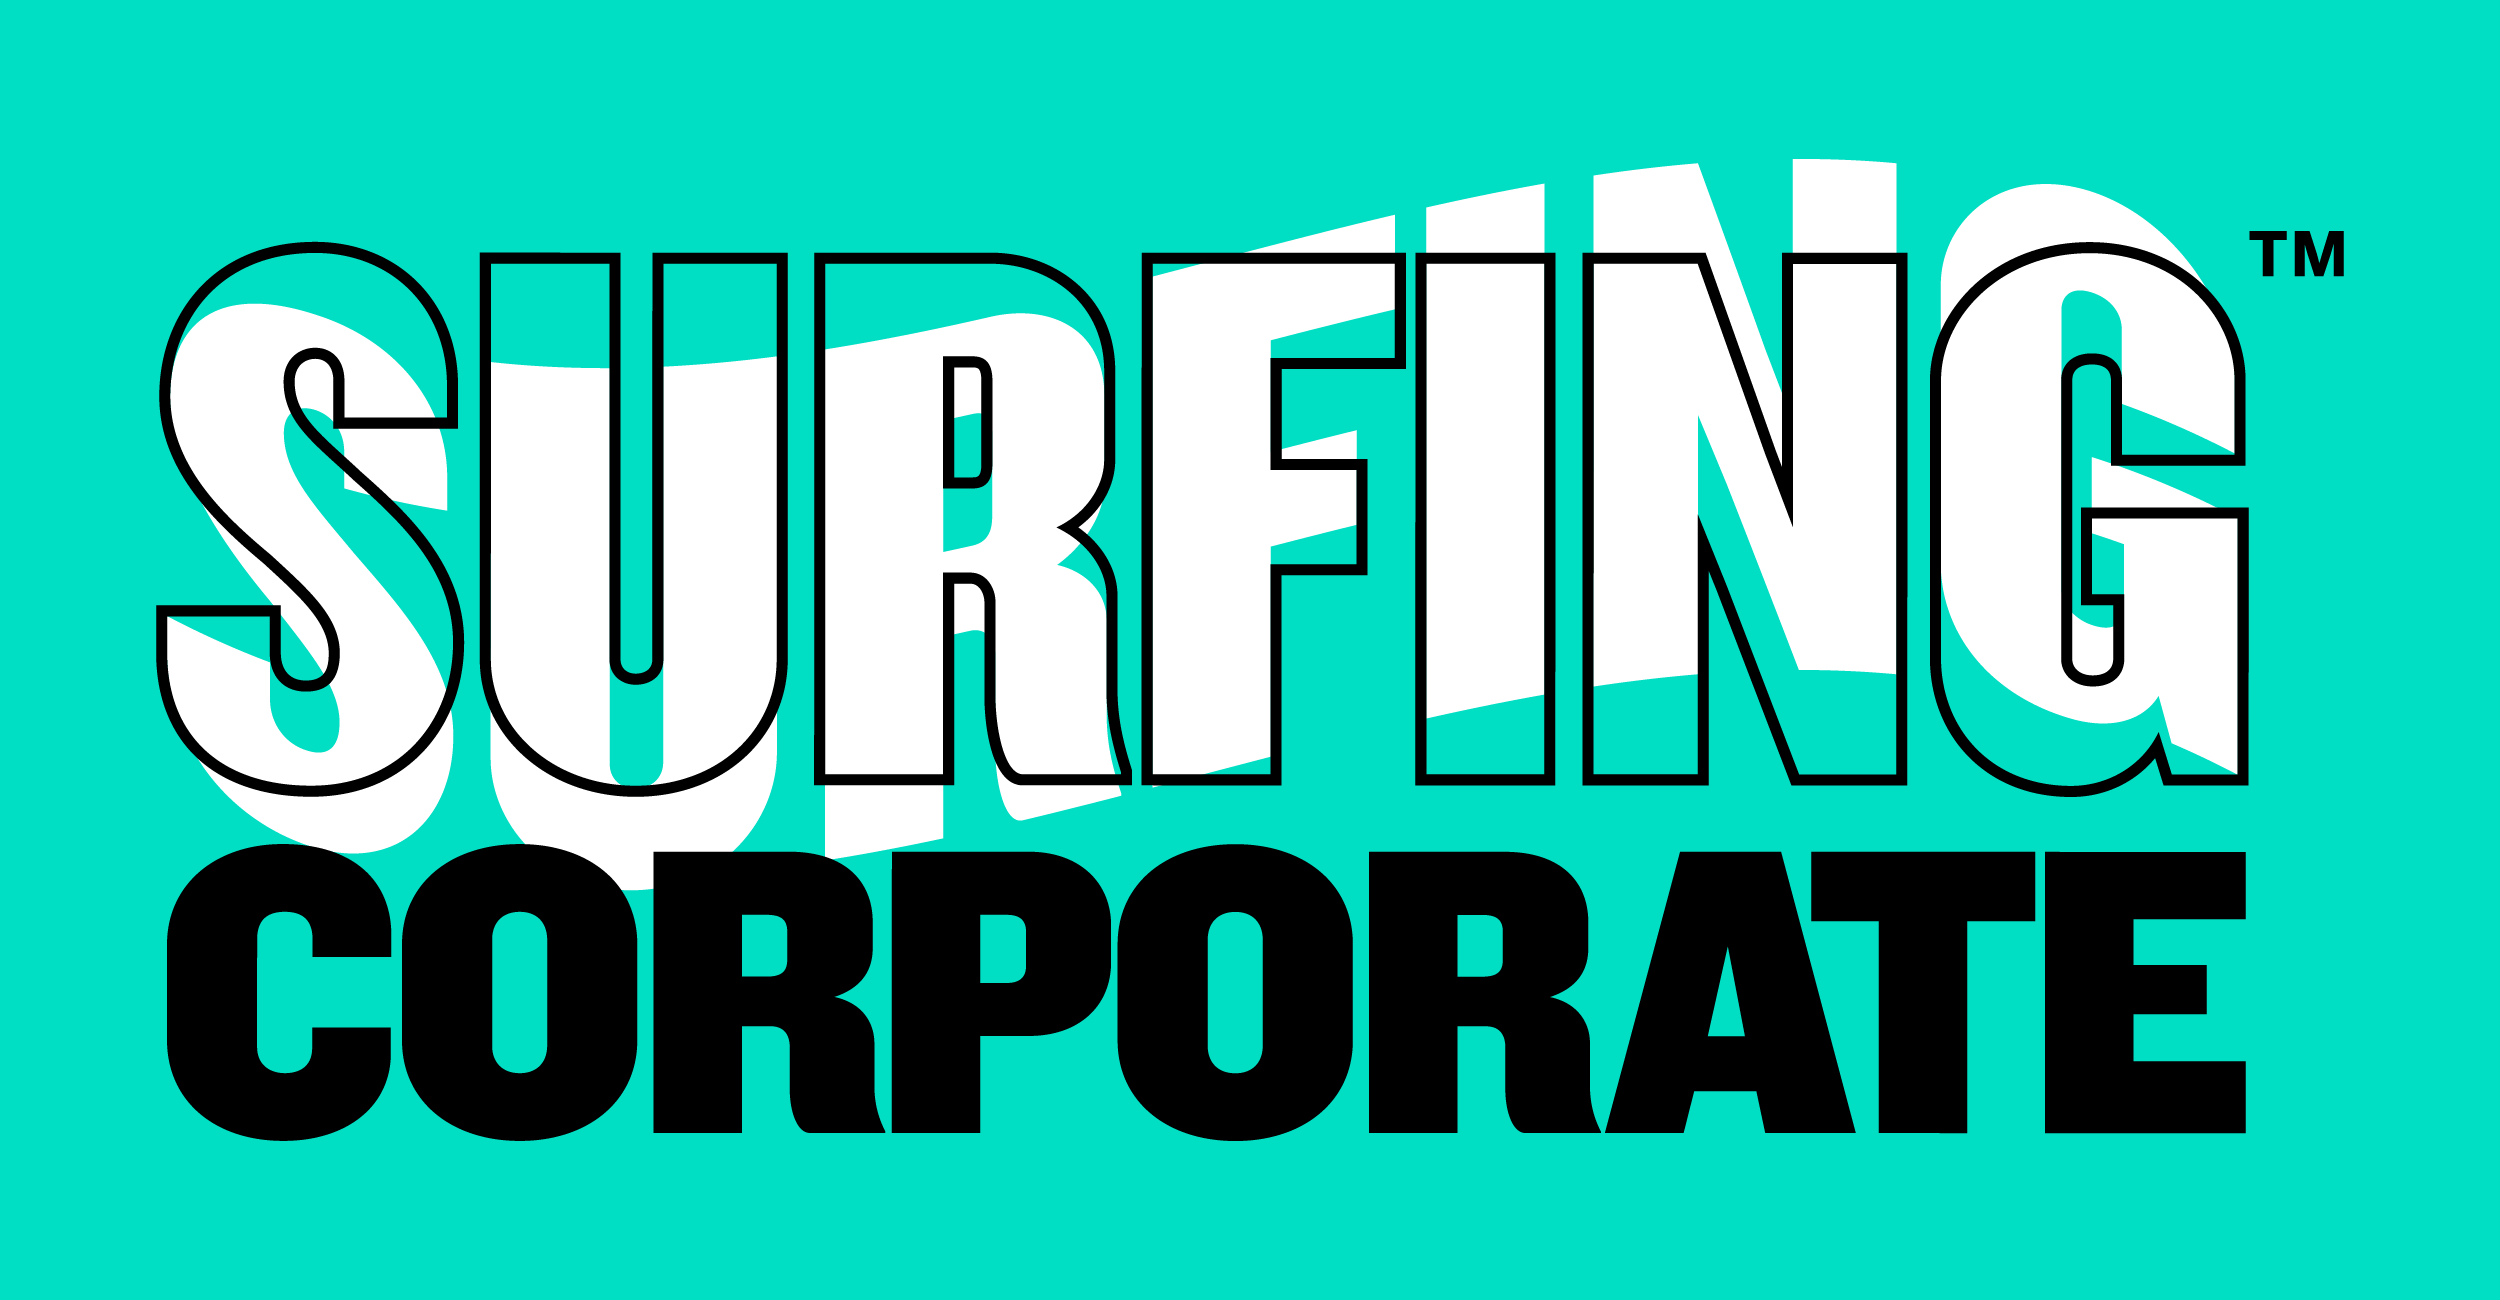 Surfing Corporate